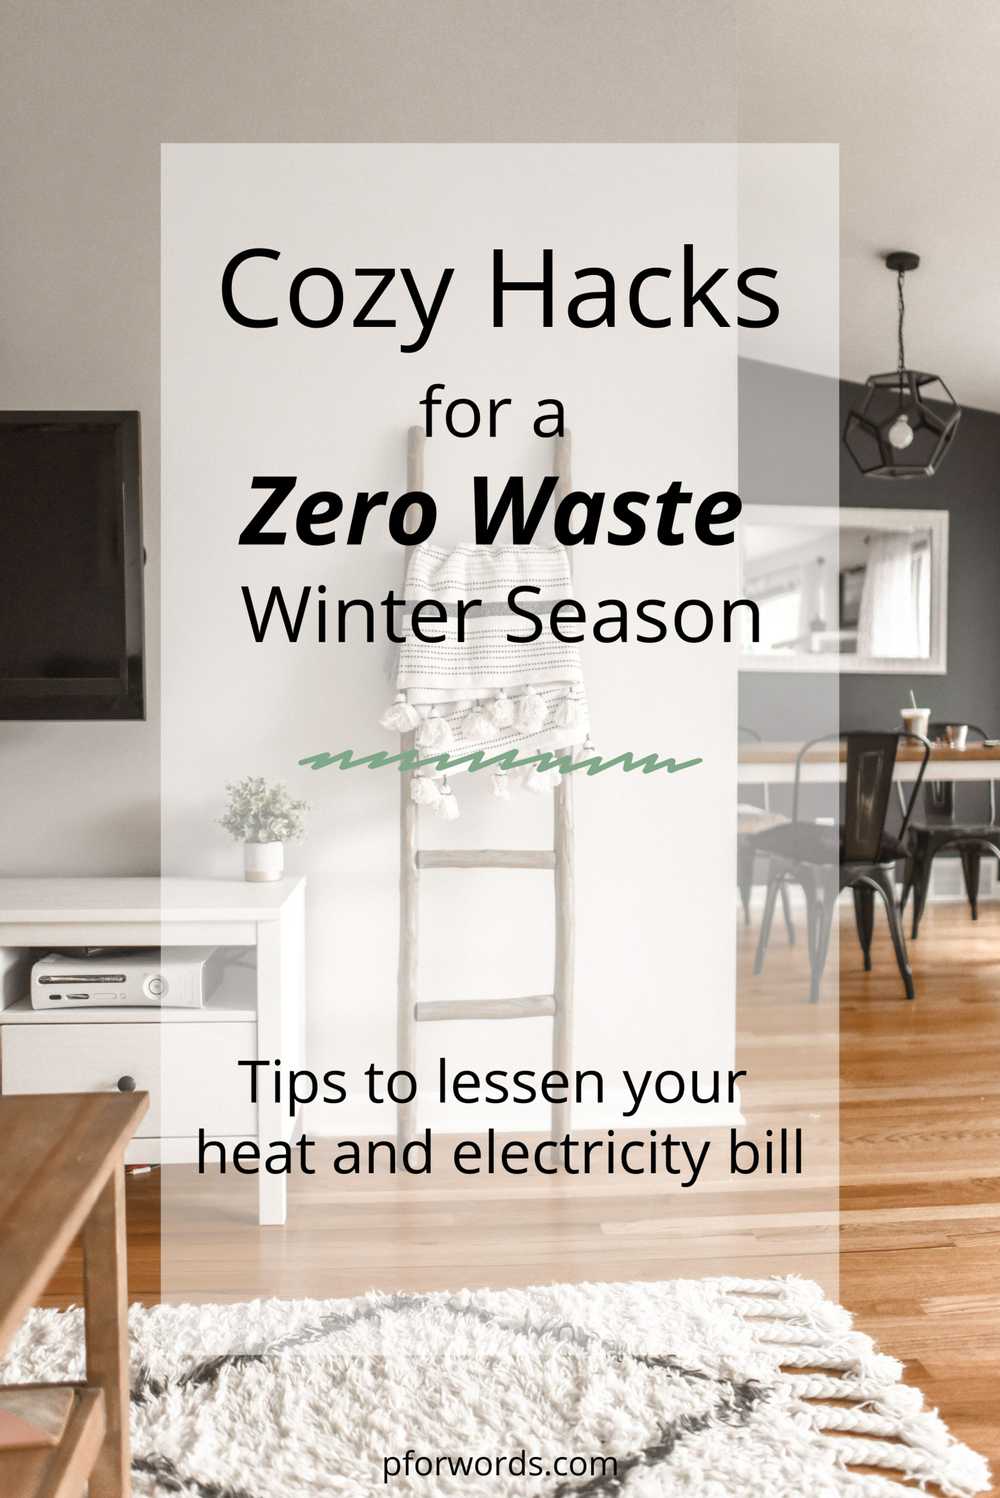 These tips help me cut down on my heating and electricity bill, while making my home super cozy! Bonus: it saves me a ton of money too!